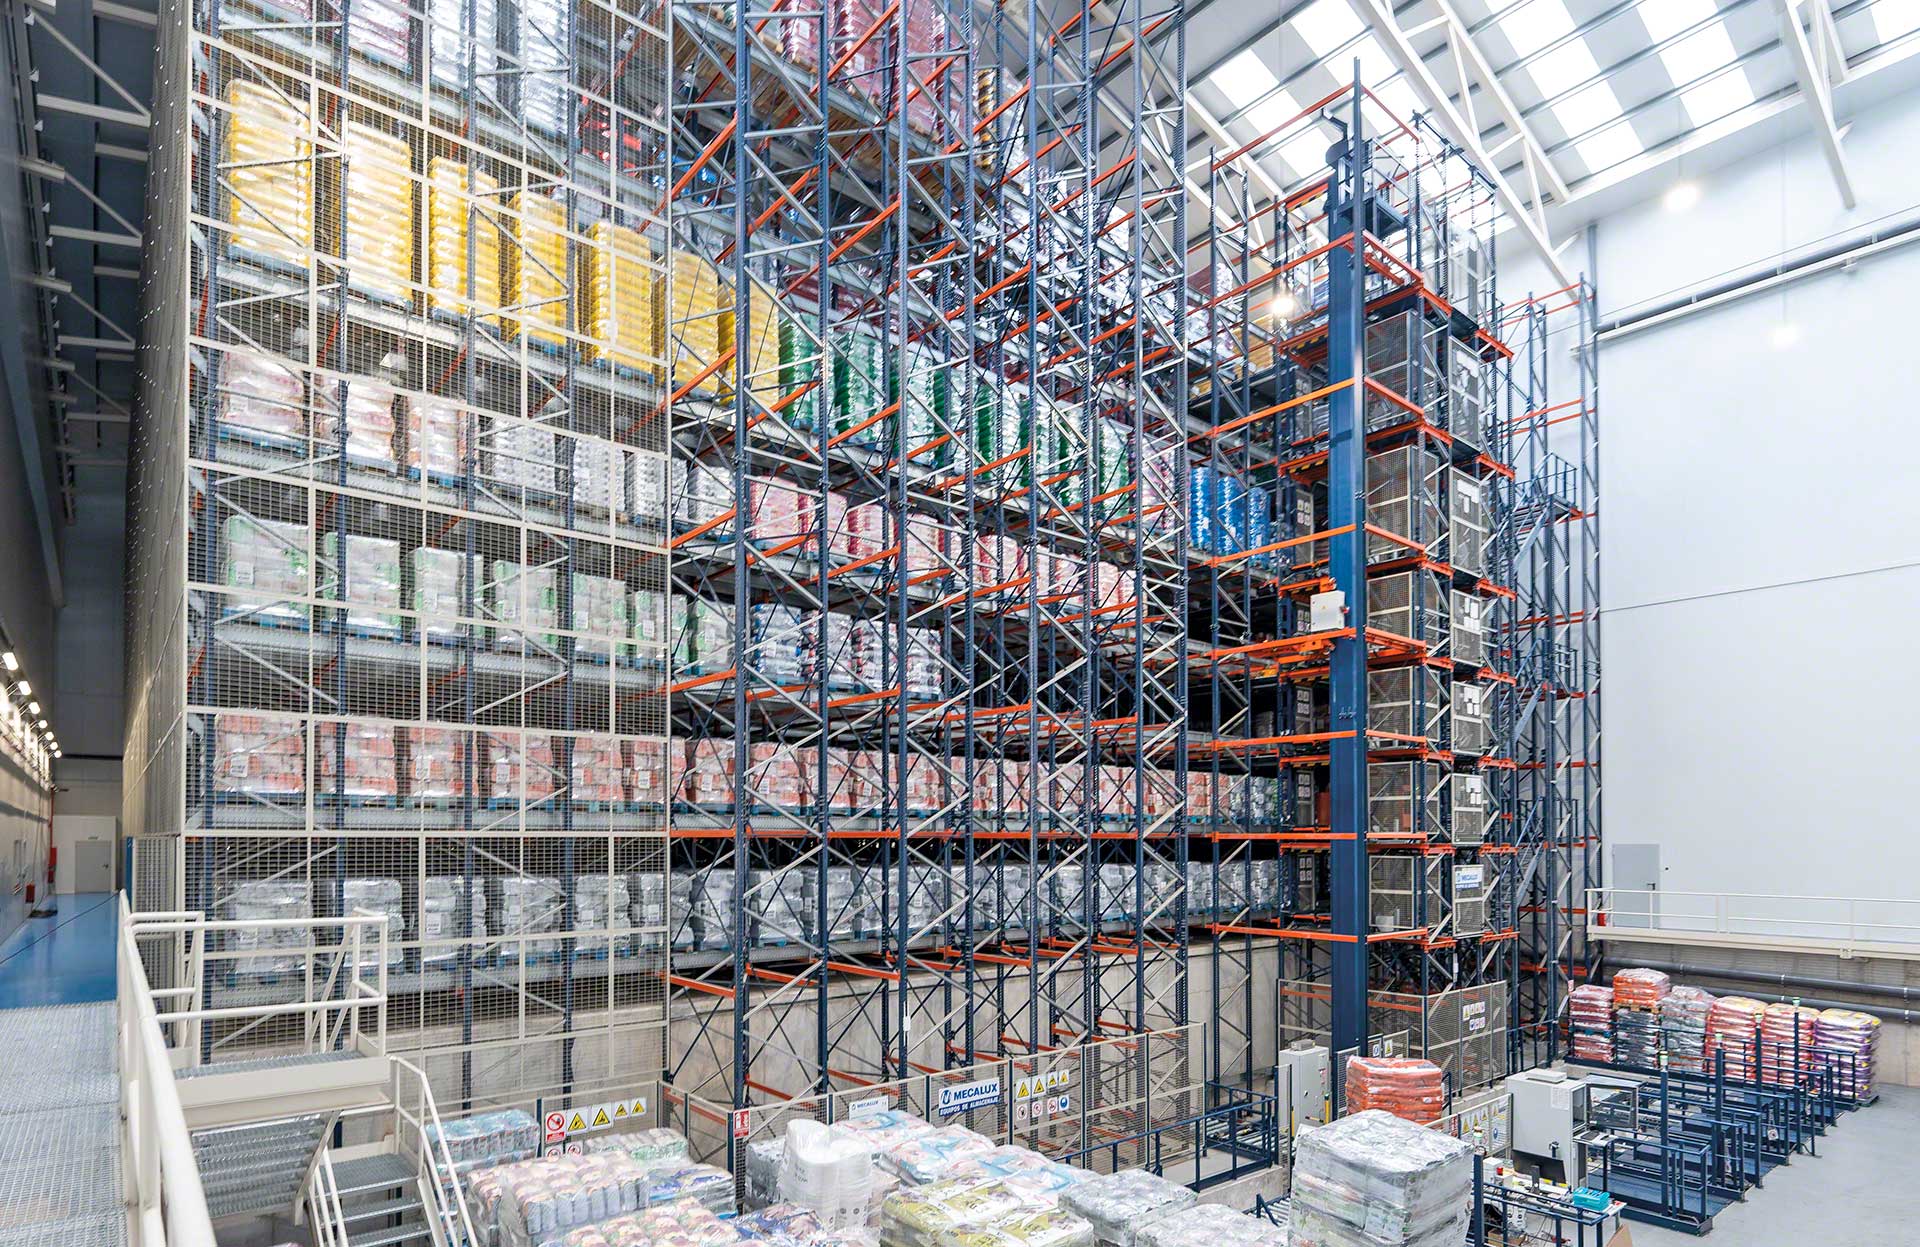 Vertical conveyors move pallets between several storage levels